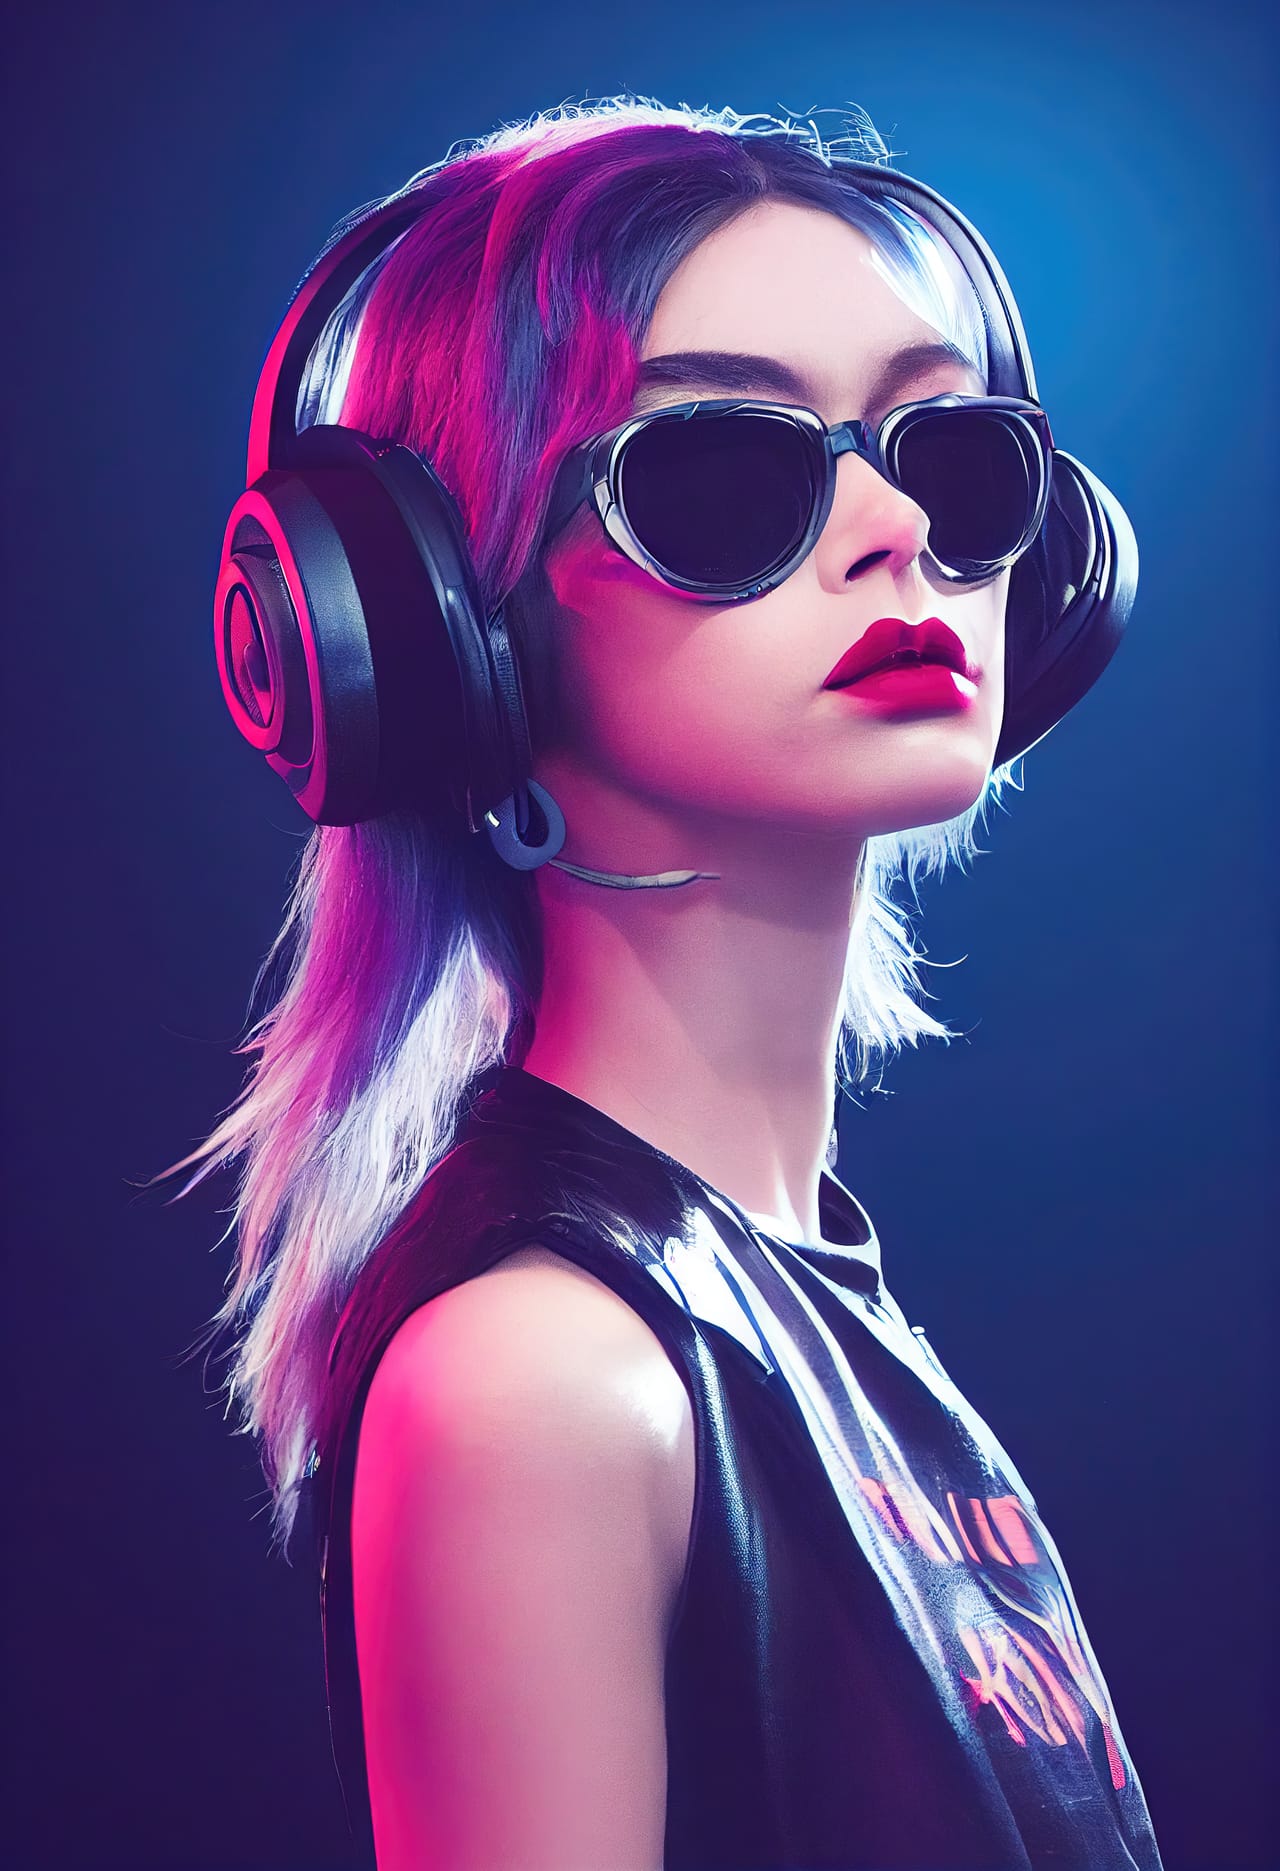 Fictional person based real person portrait creative beauty wearing headphones